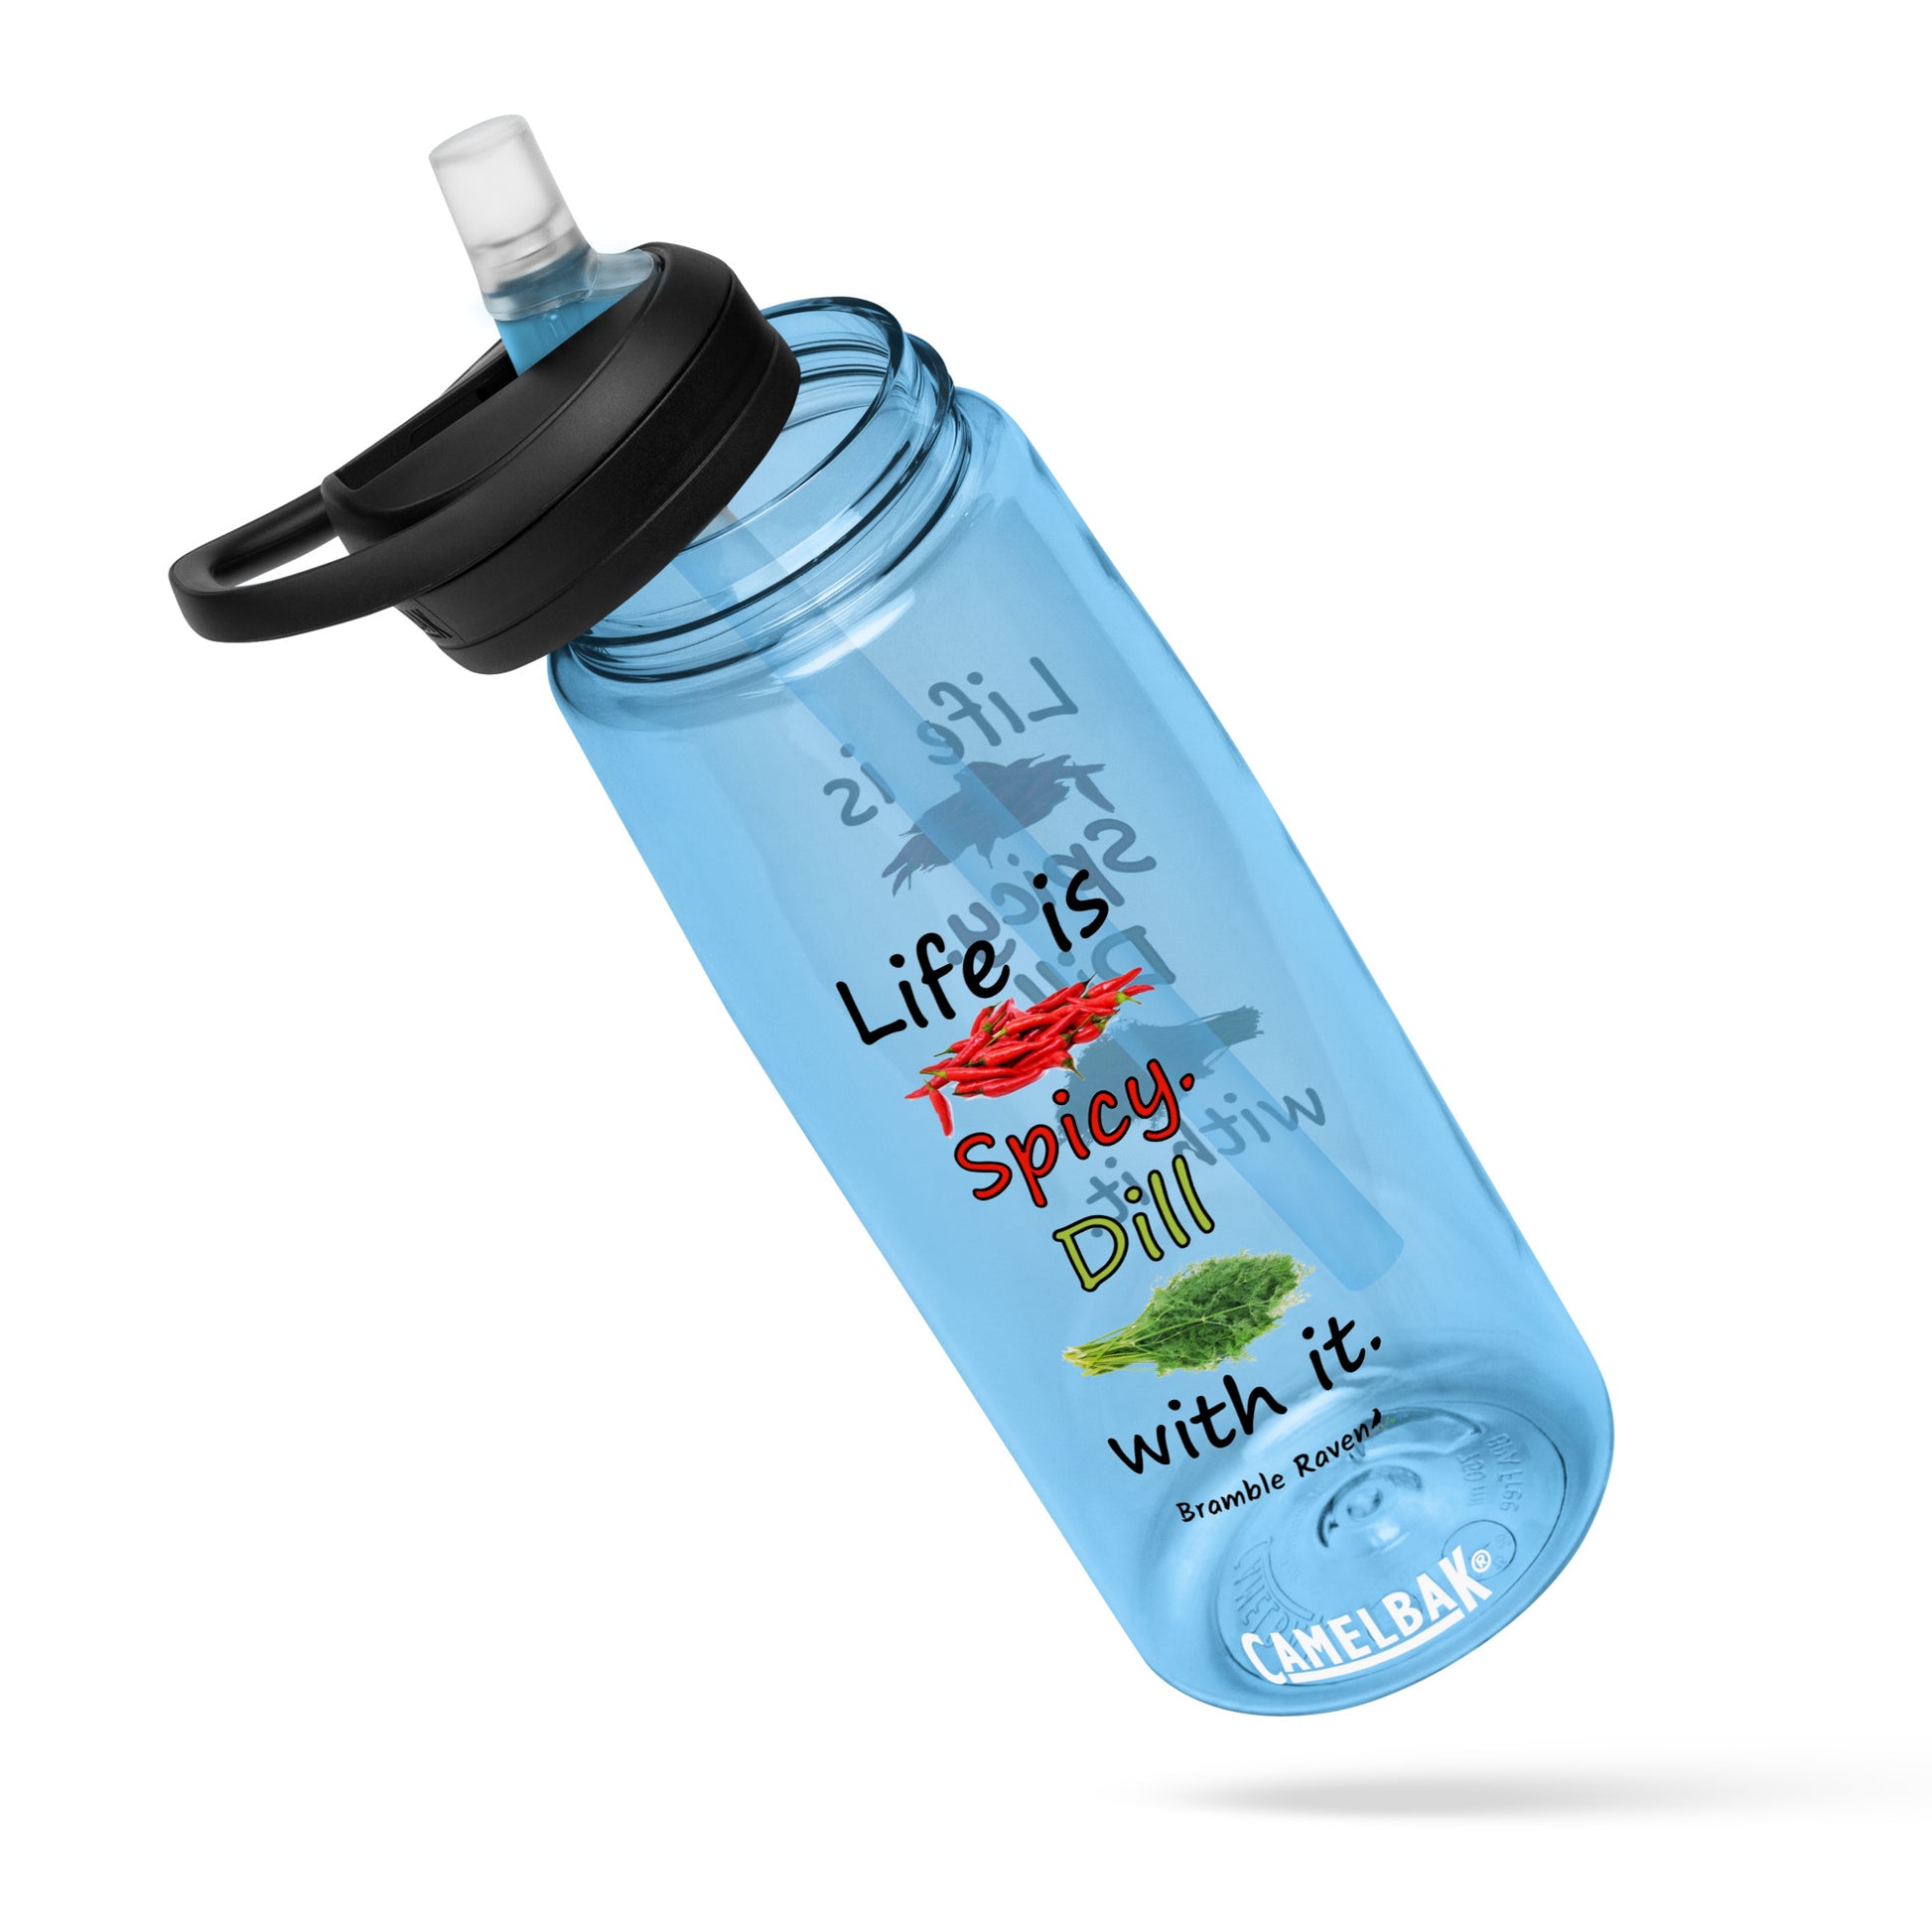 25 ounce sports water bottle with spill-proof lid and bite valve. Light blue stain and odor-resistant BPA-free plastic. Features double-sided design of "Life is spicy. Dill with it" phrase with peppers and dill weed images.